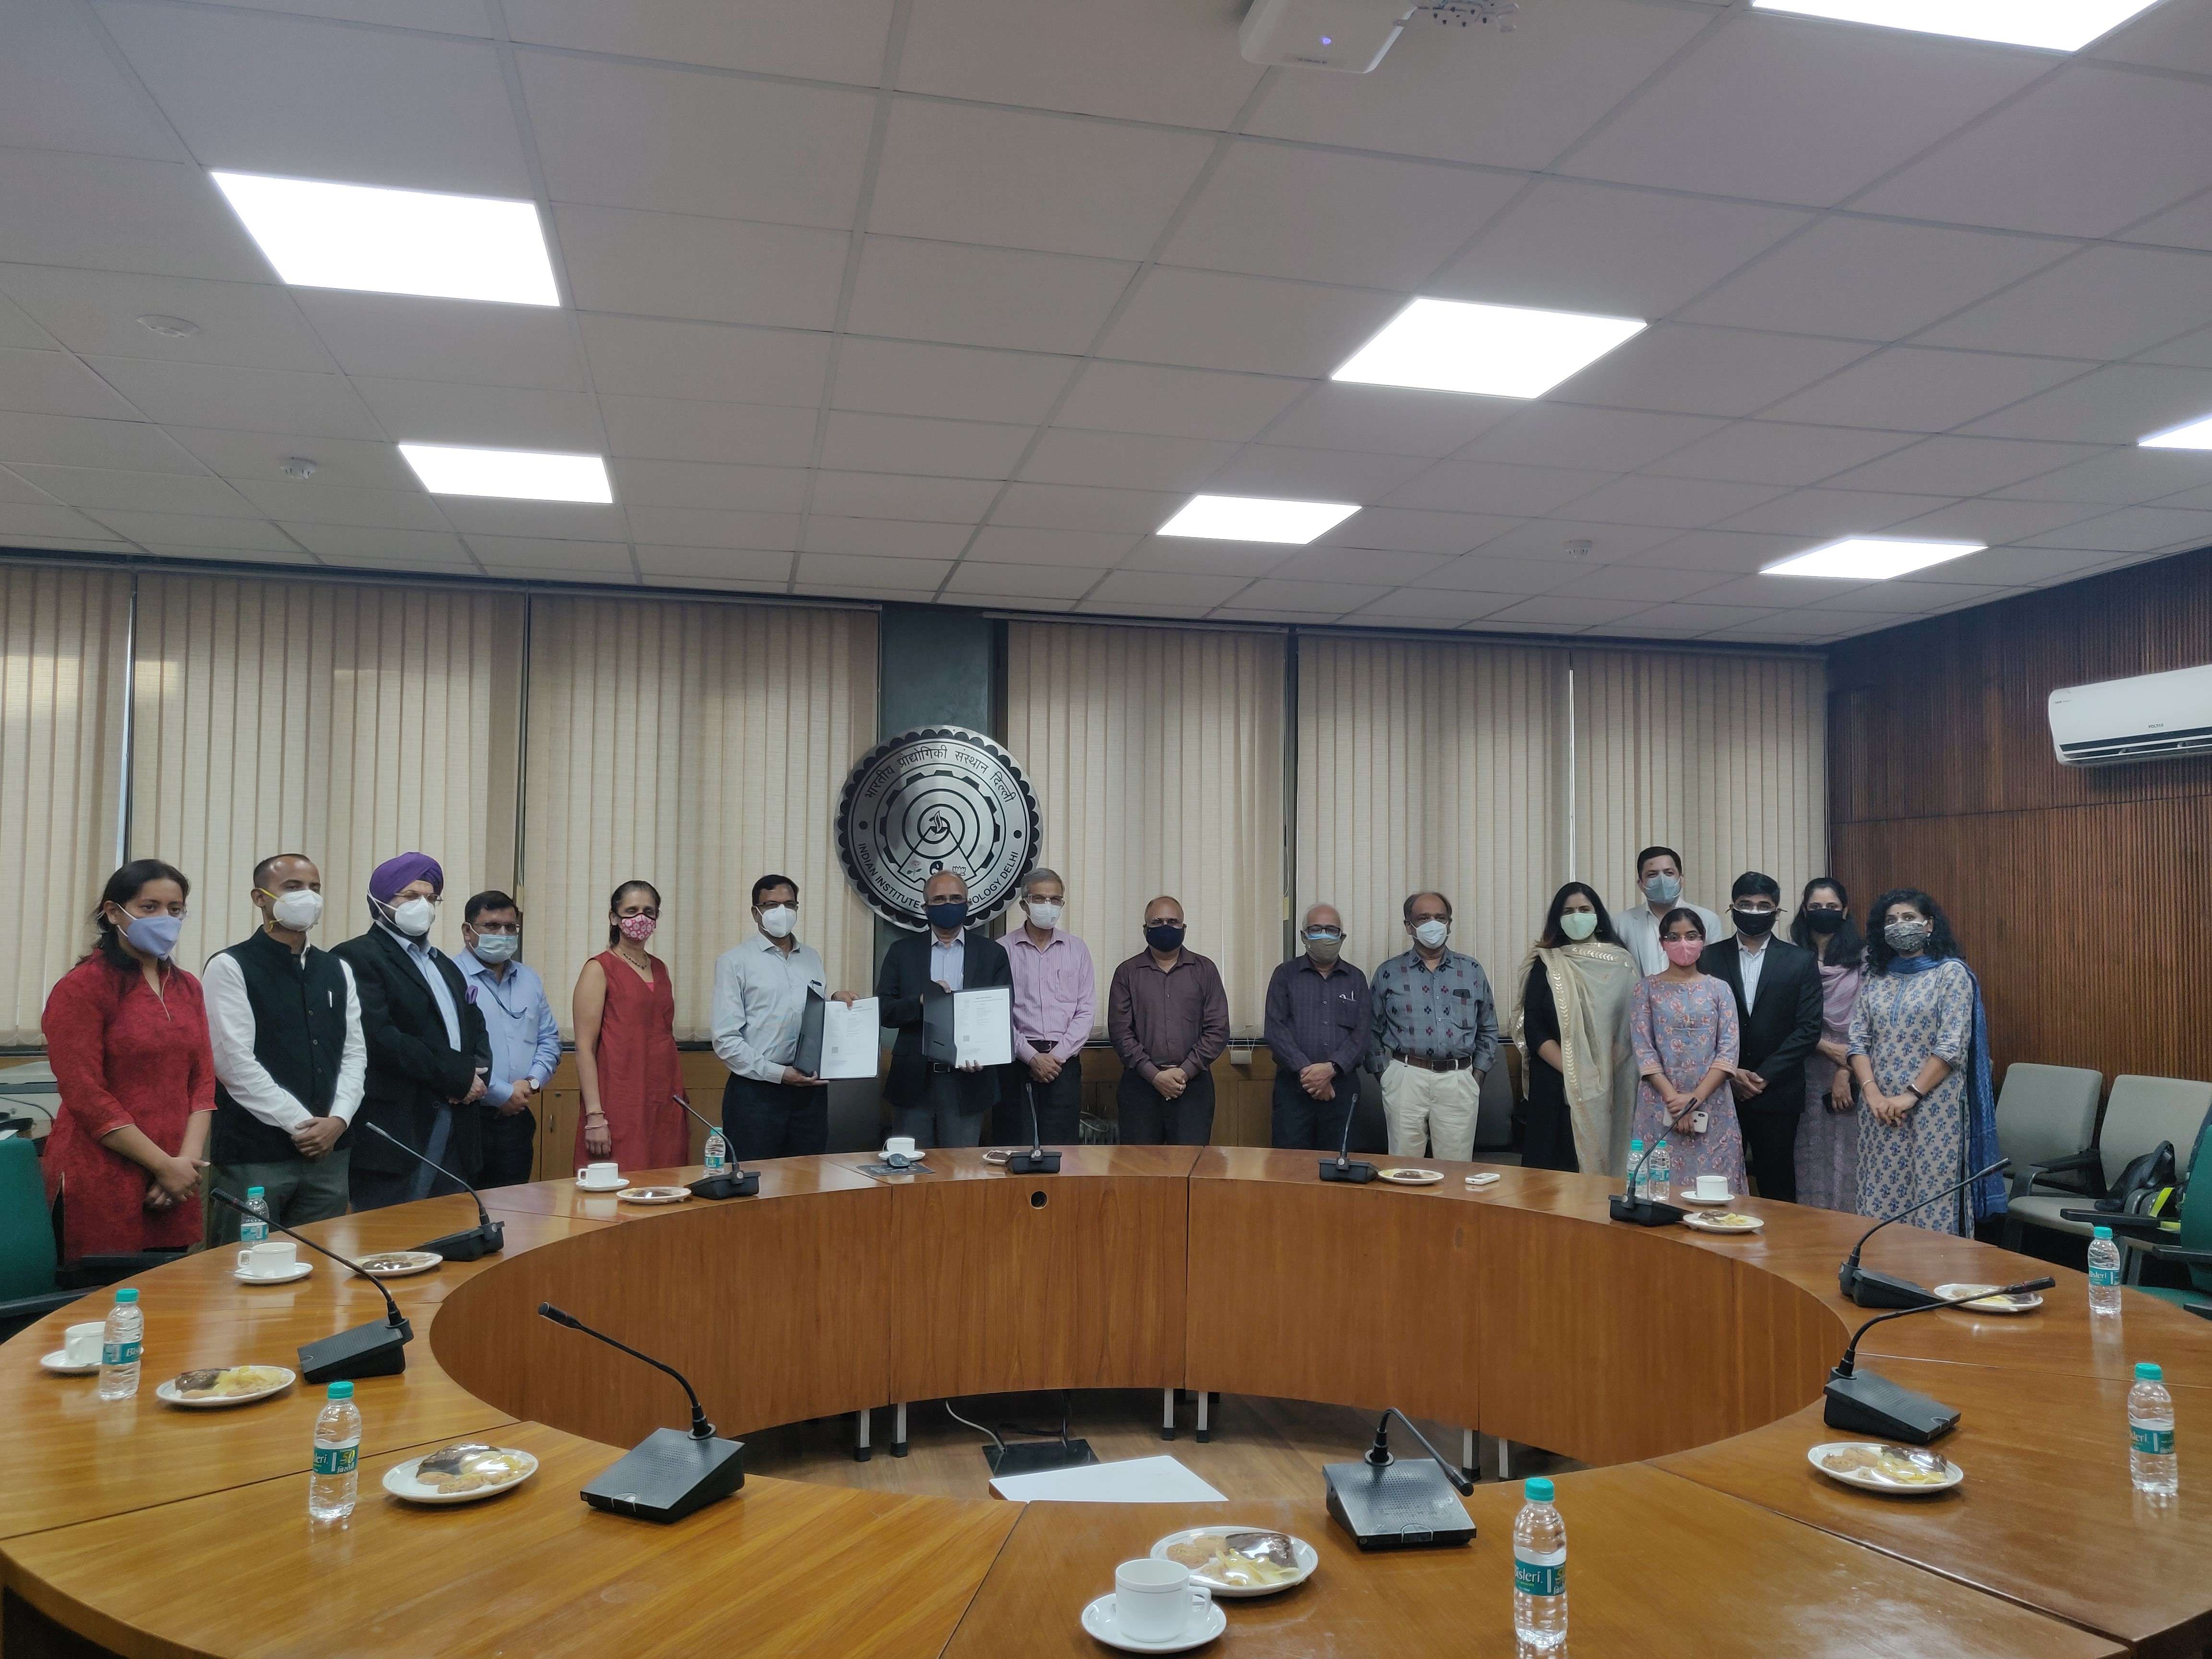 NHA and IIT Delhi join hands to scale high-potential healthcare innovations